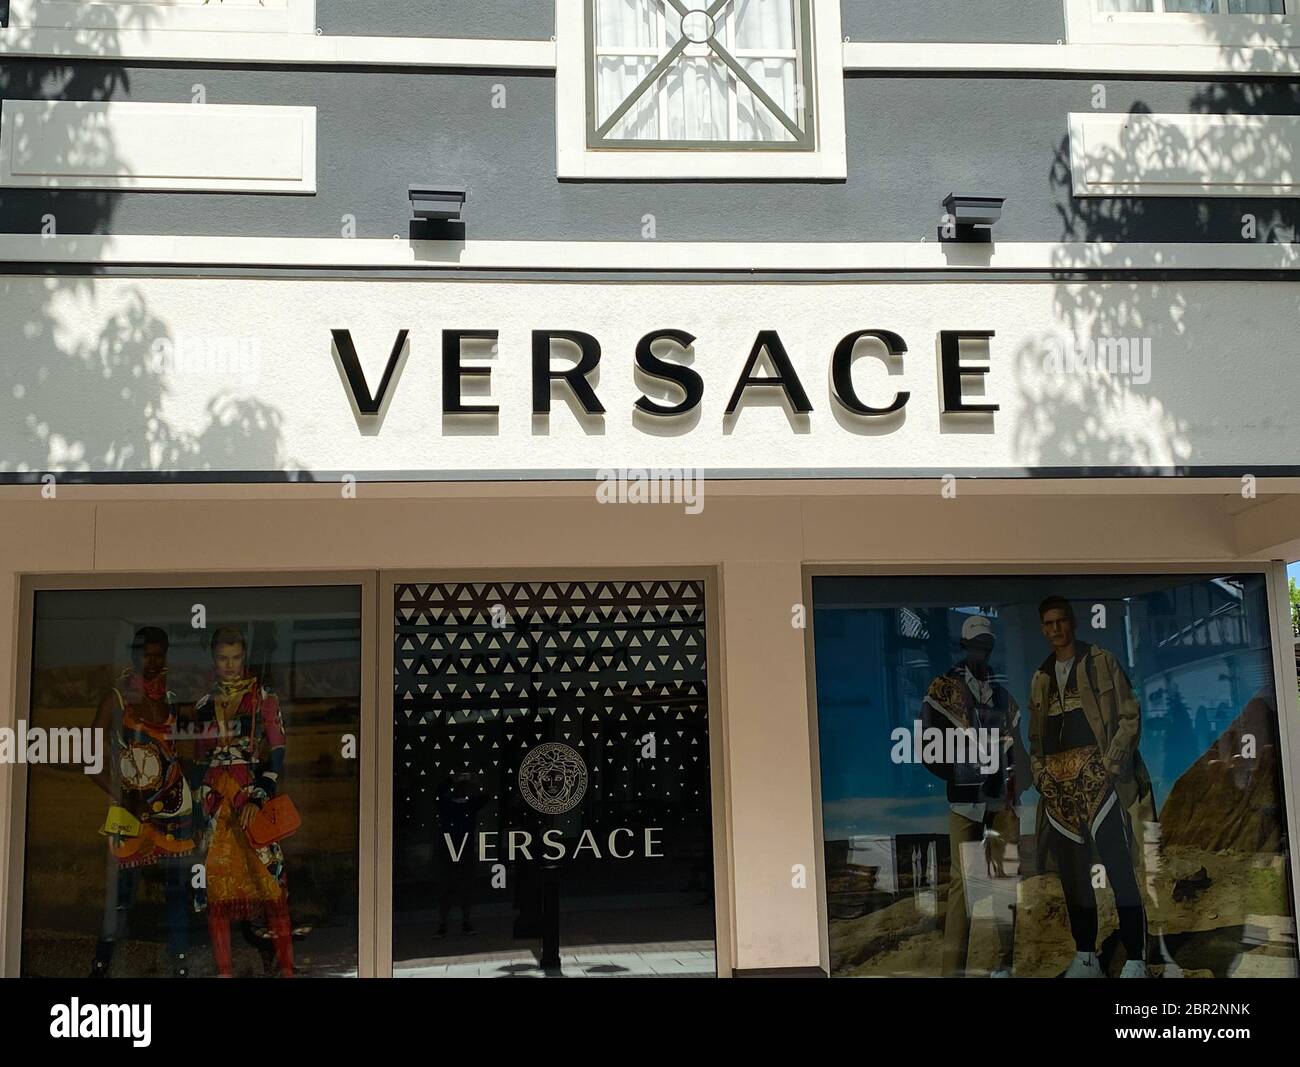 Roermond, Netherlands - May 19. 2020: View on facade with logo lettering of  Versace fashion company at shop entrance Stock Photo - Alamy